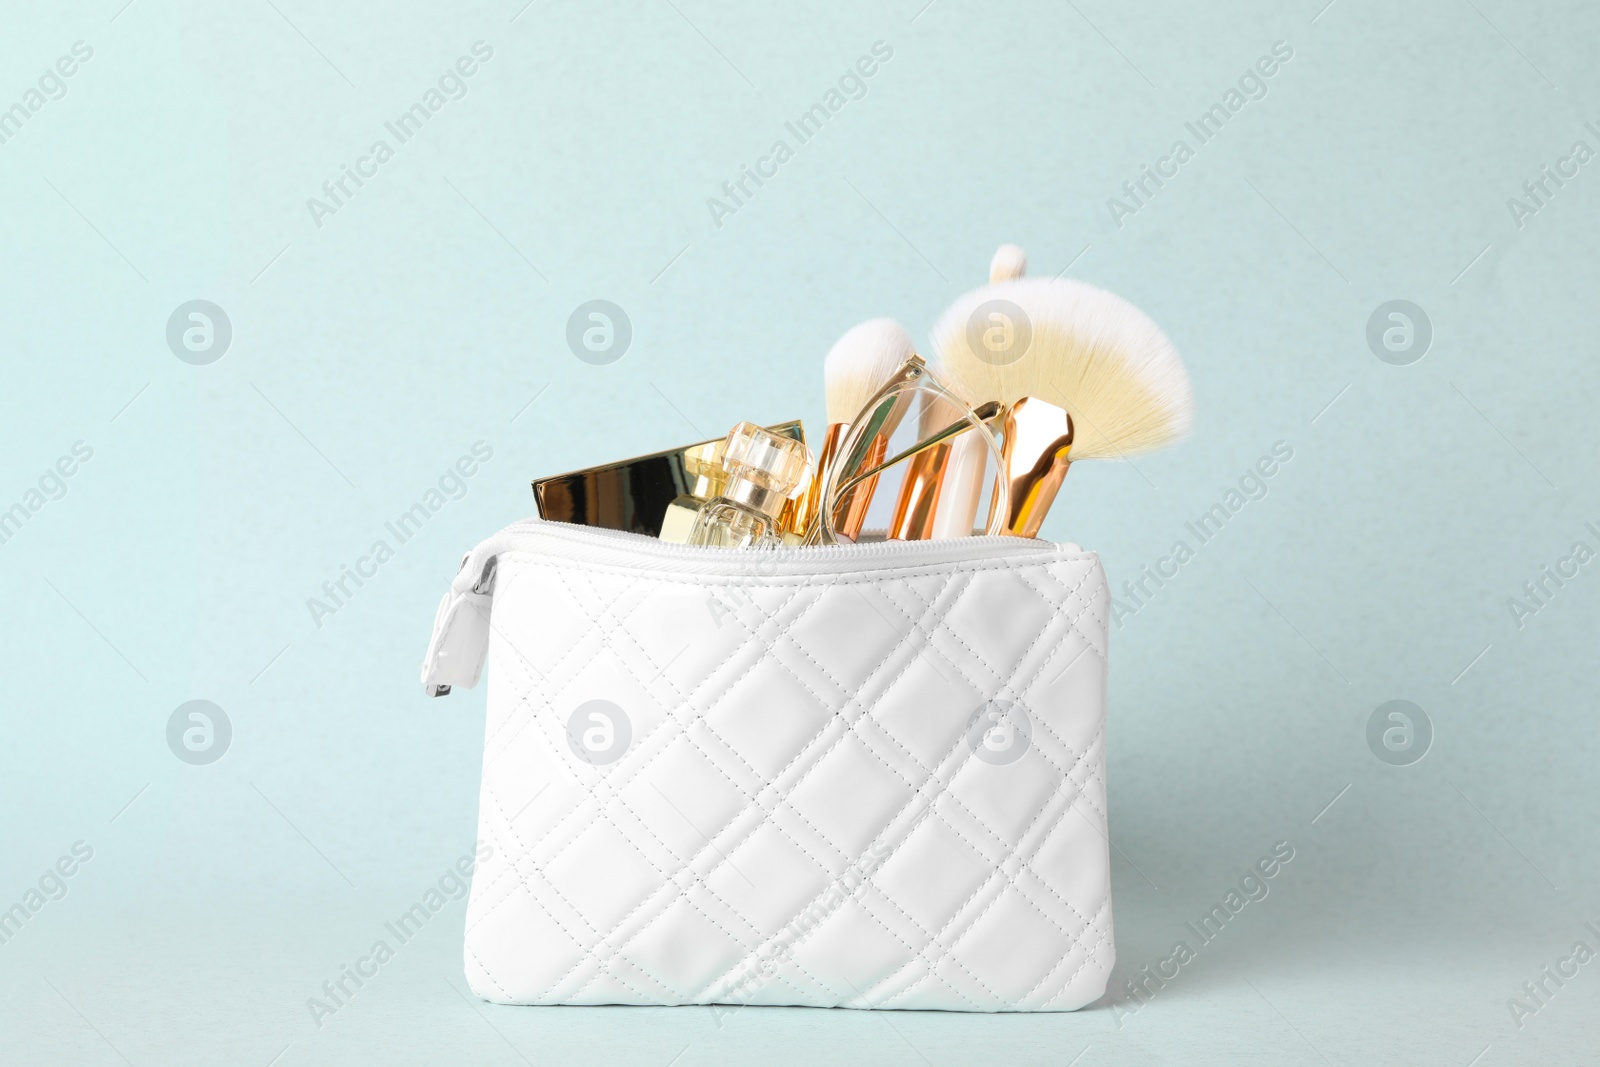 Photo of Cosmetic bag with makeup products and beauty accessories on light blue background